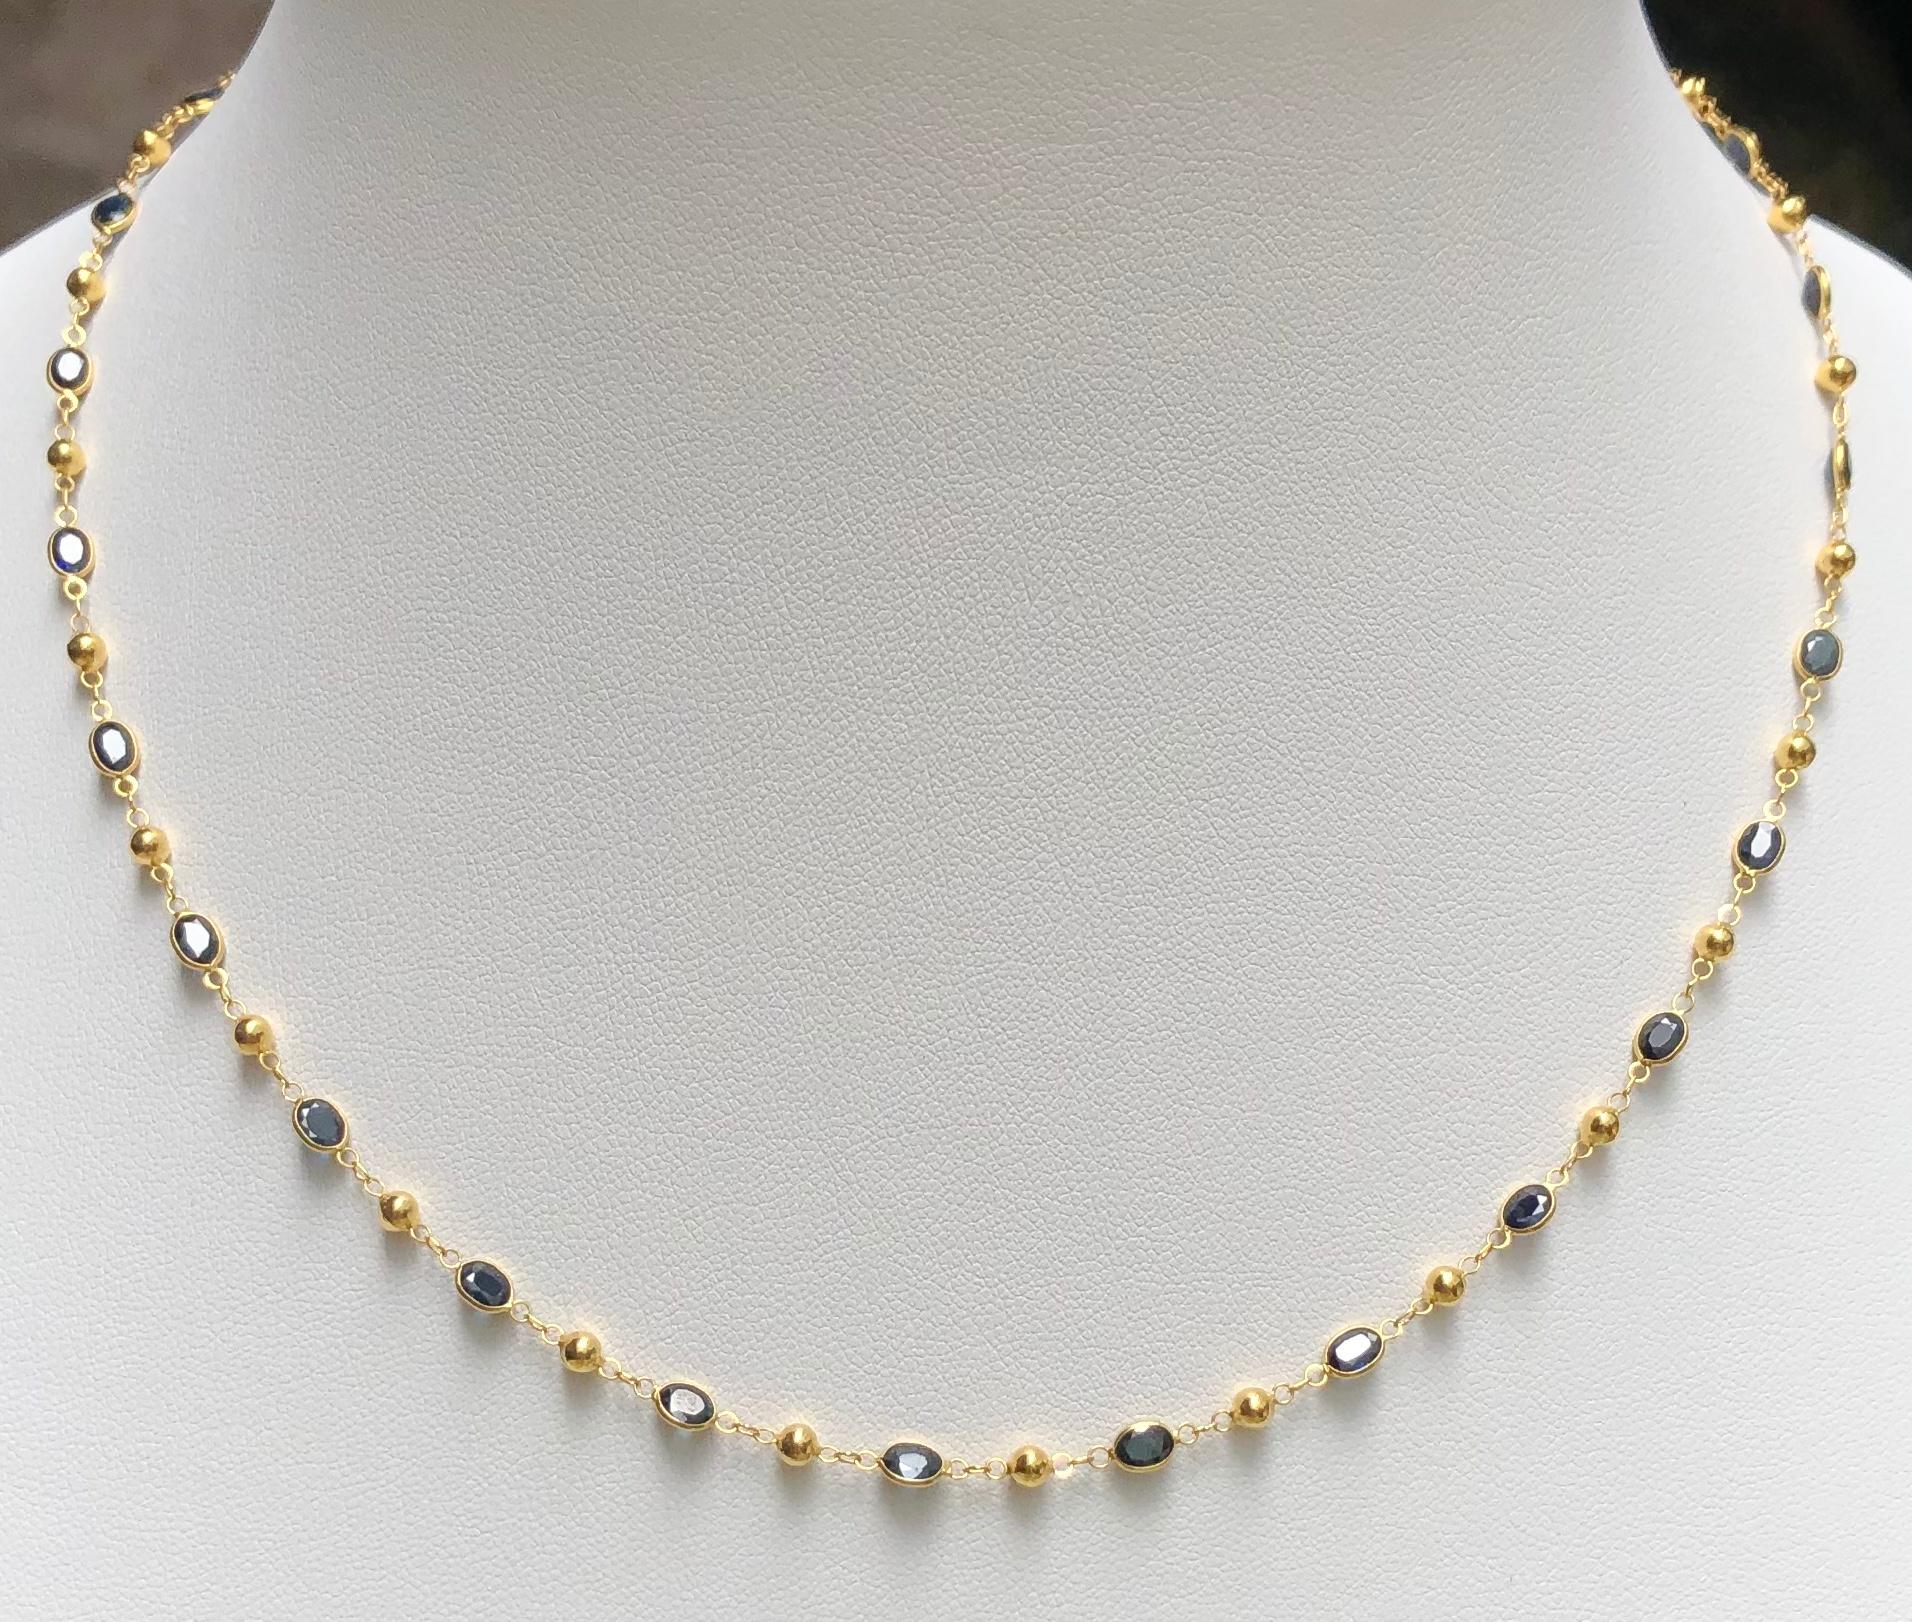 Blue Sapphire 7.34 carats Necklace set in 18 Karat Gold Settings

Width: 0.4 cm 
Length: 46.0 cm
Total Weight: 3.85 grams

